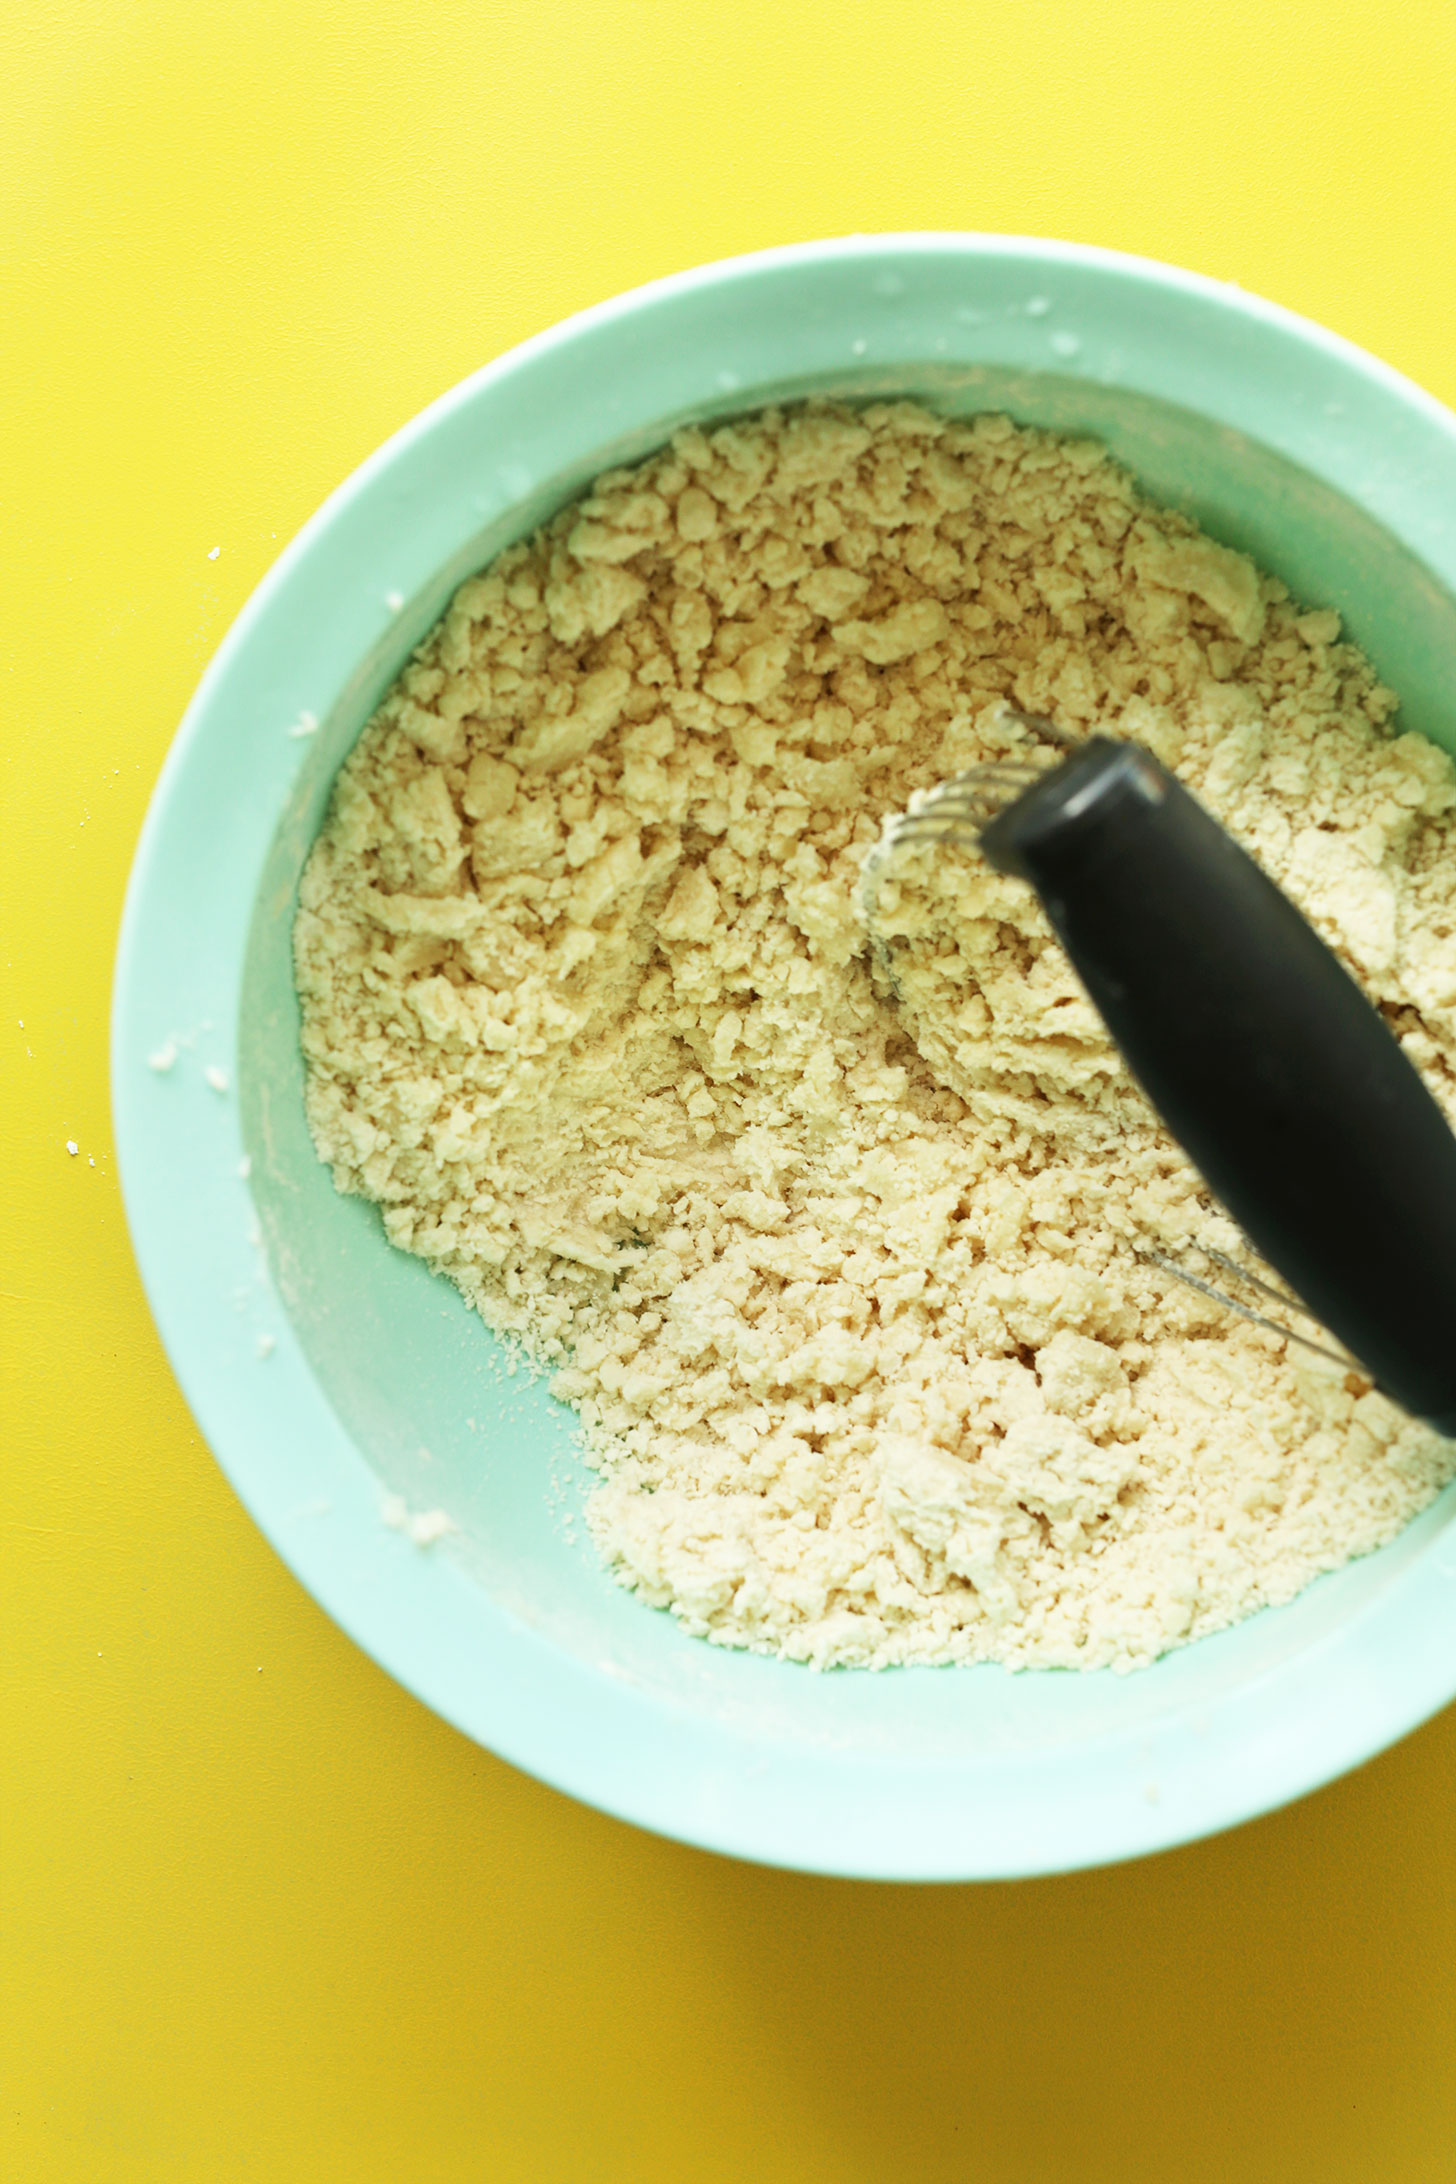 Using a pastry cutter to mix coconut oil and dry ingredients